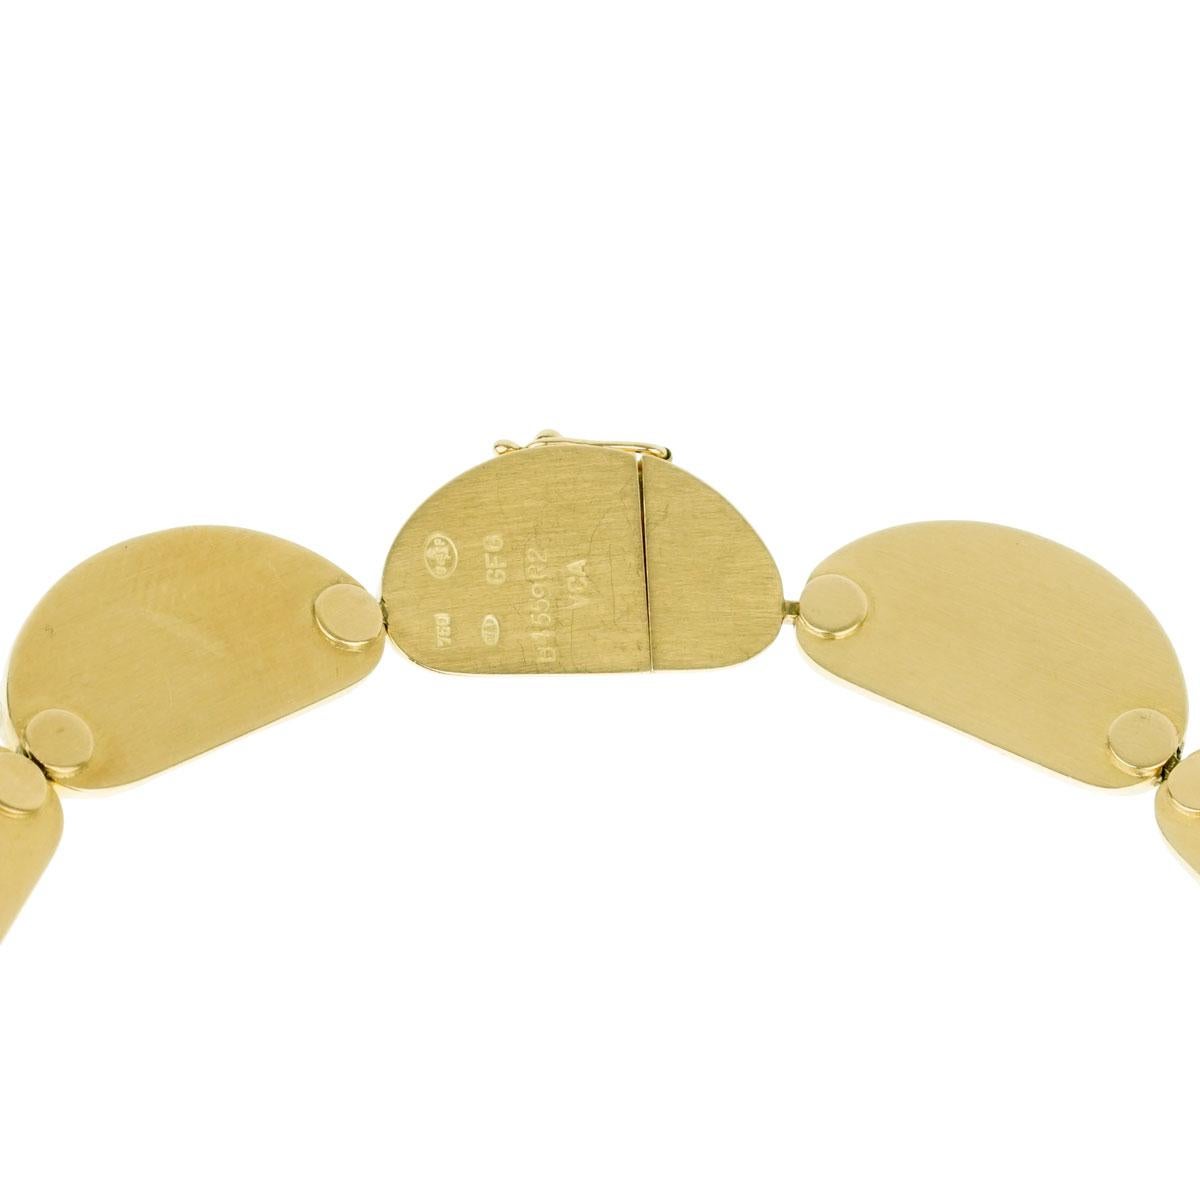 A fabulous vintage Van Cleef & Arpels necklace crafted in 18k yellow gold. The necklace features high polished oval concave links.

Length: 16.5